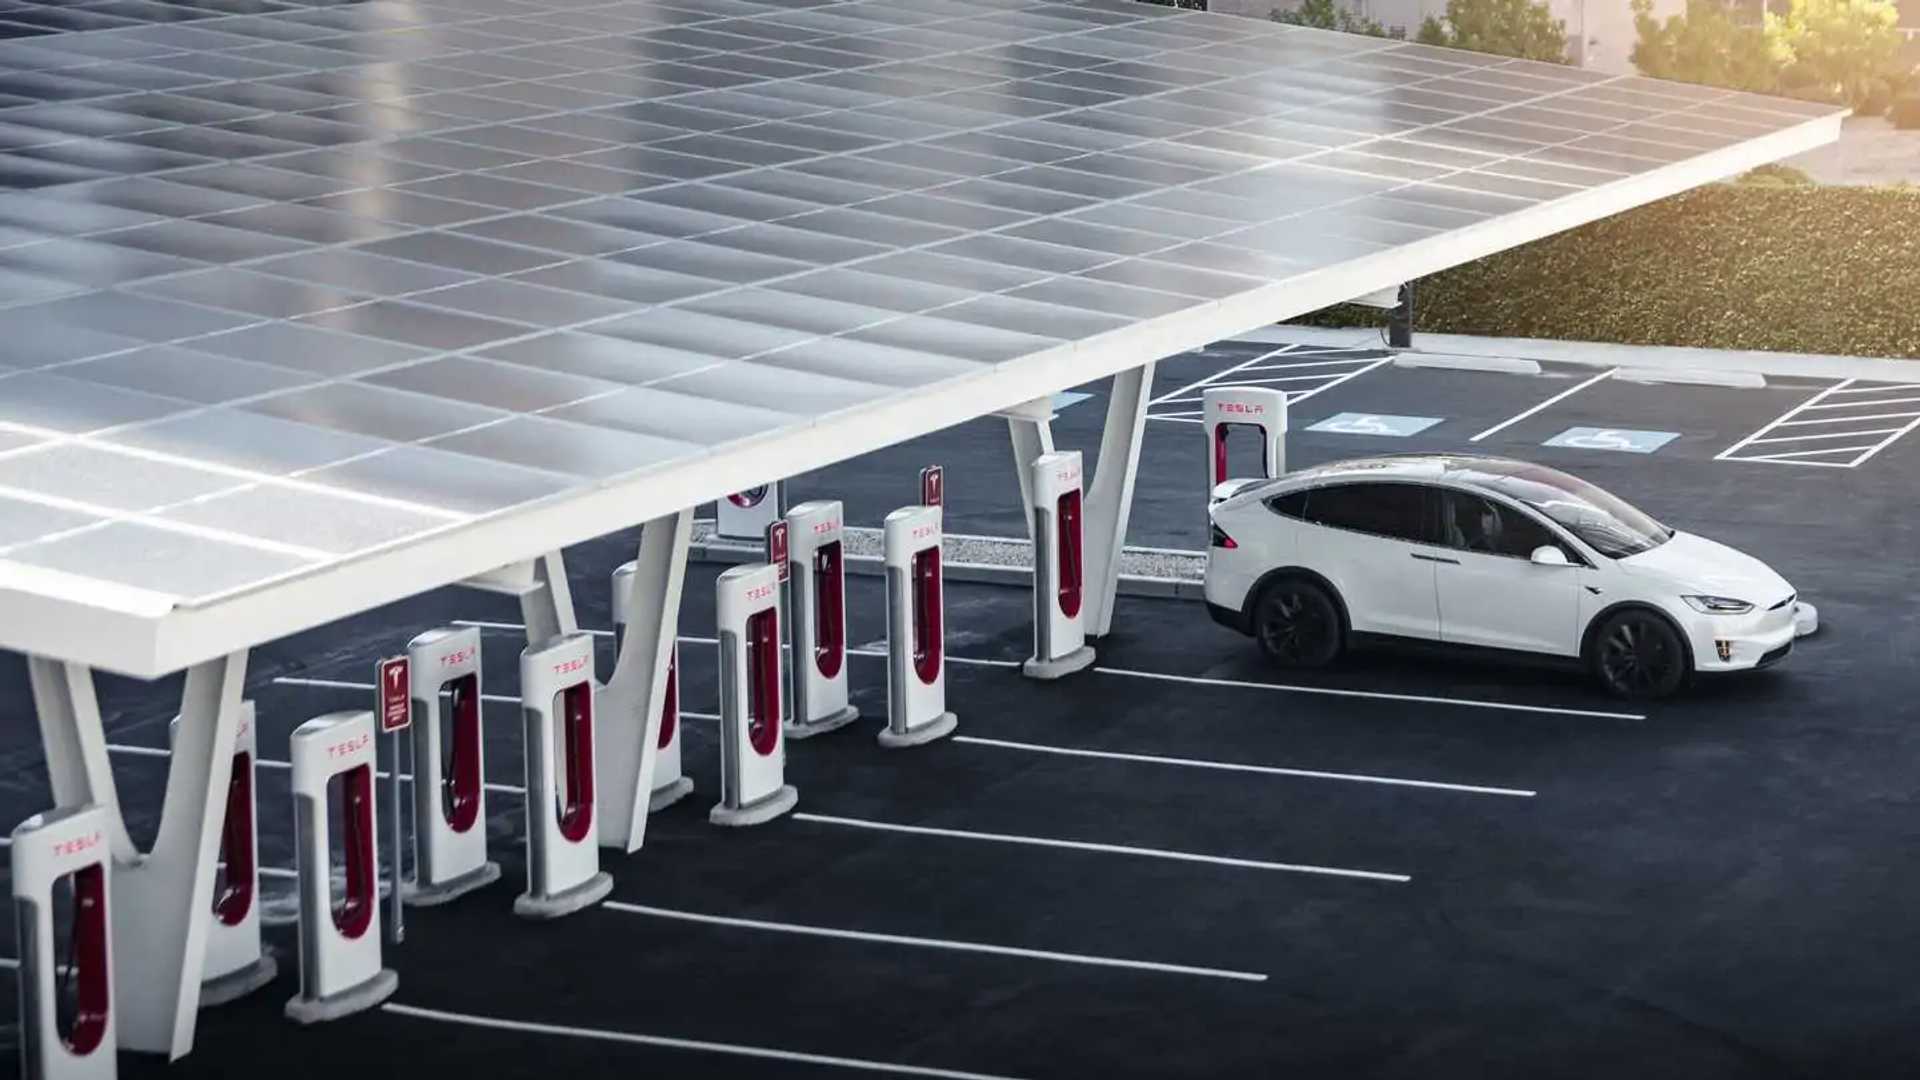 The World’s Biggest Tesla Supercharger Will Have Over 160 Stalls